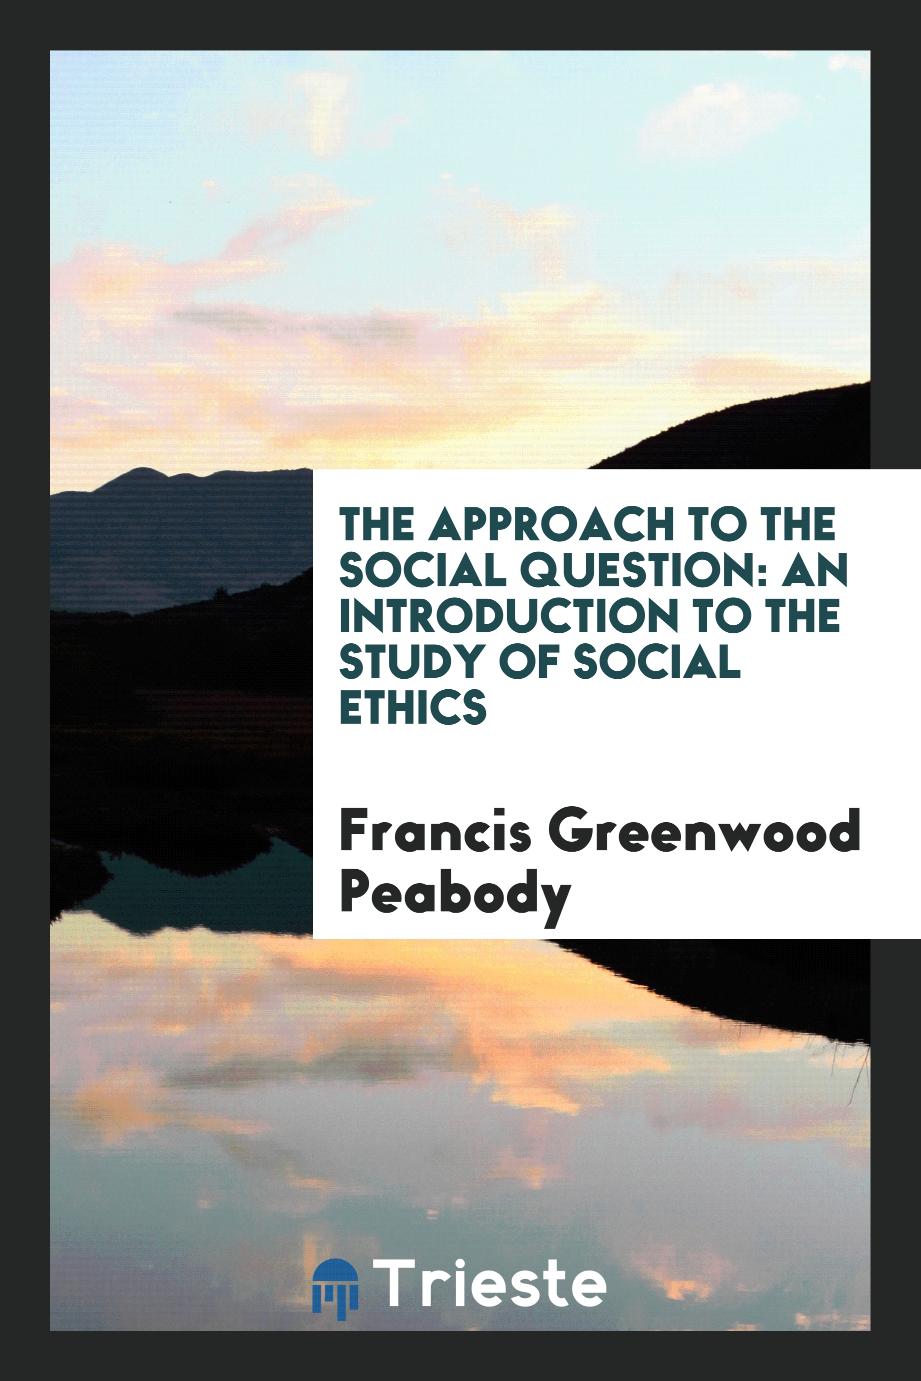 The approach to the social question: an introduction to the study of social ethics